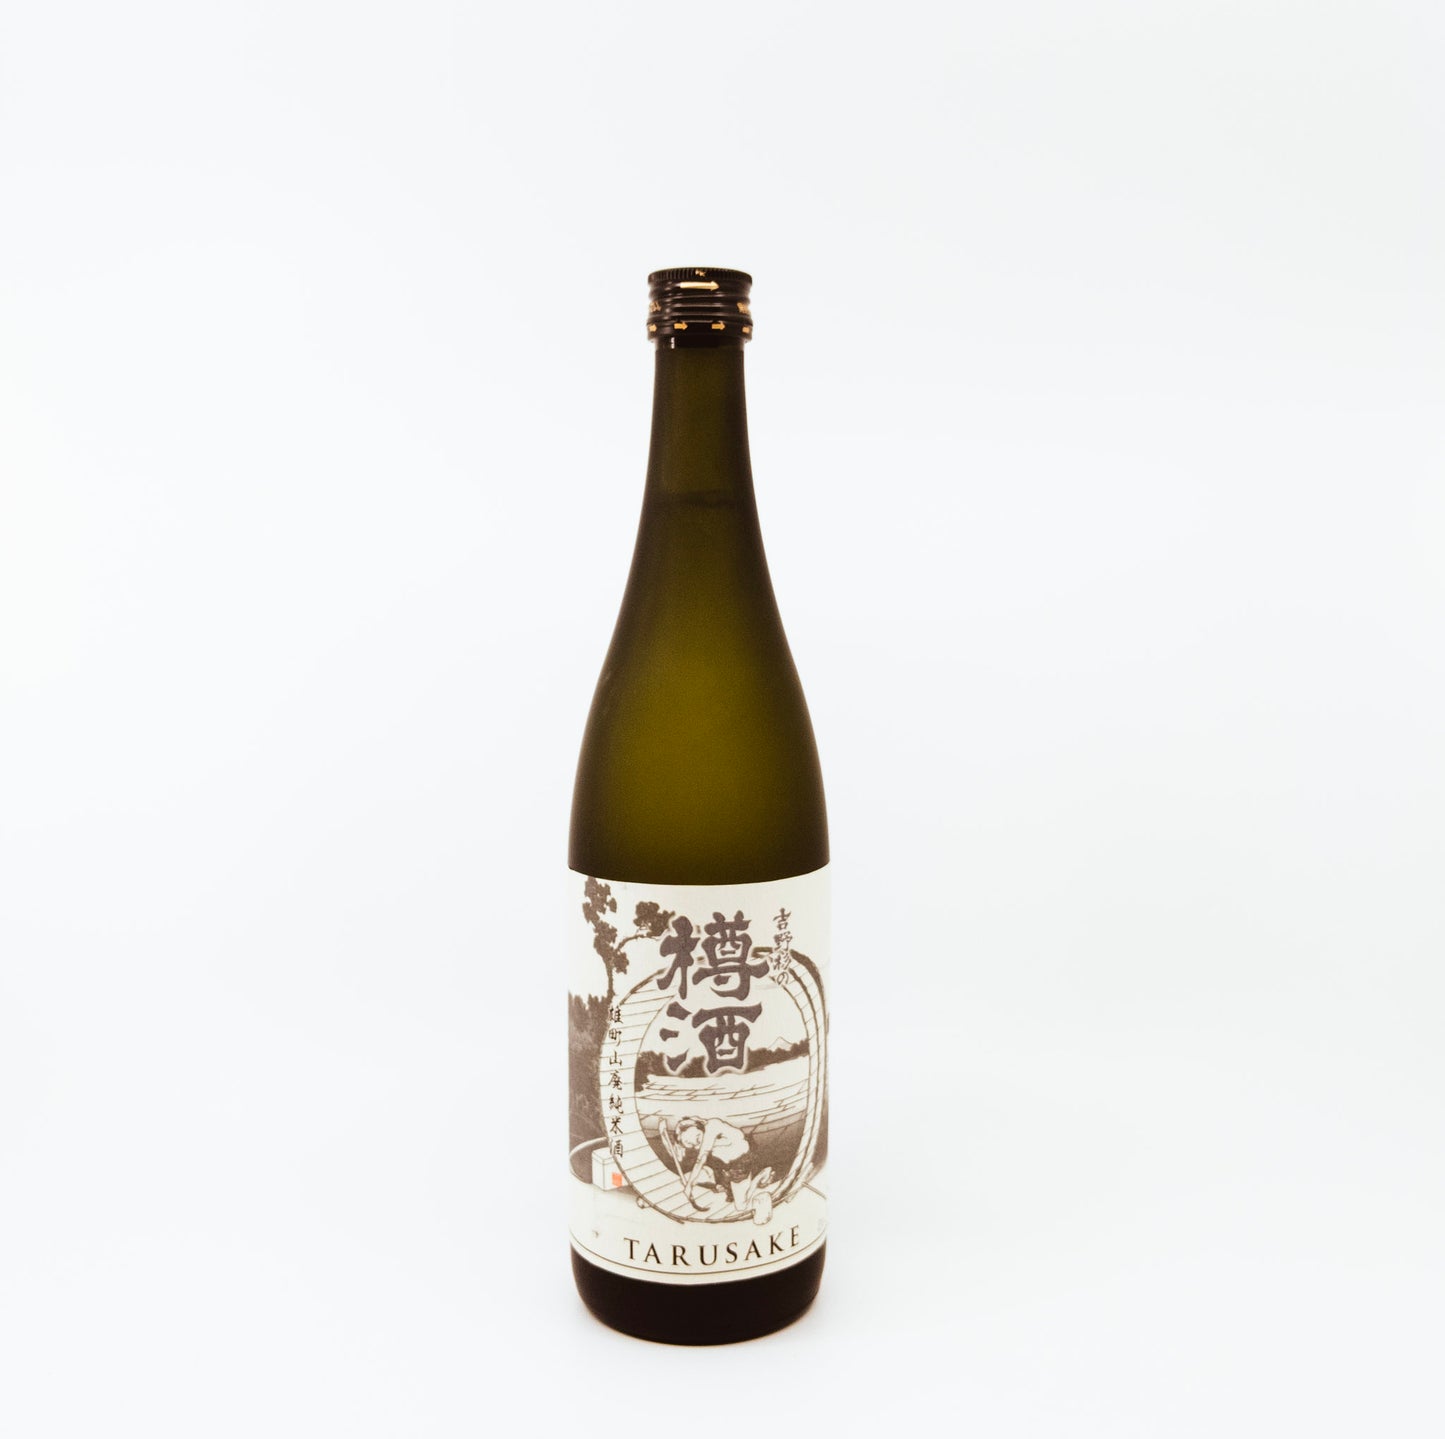 dark green bottle with brown graphic on white label